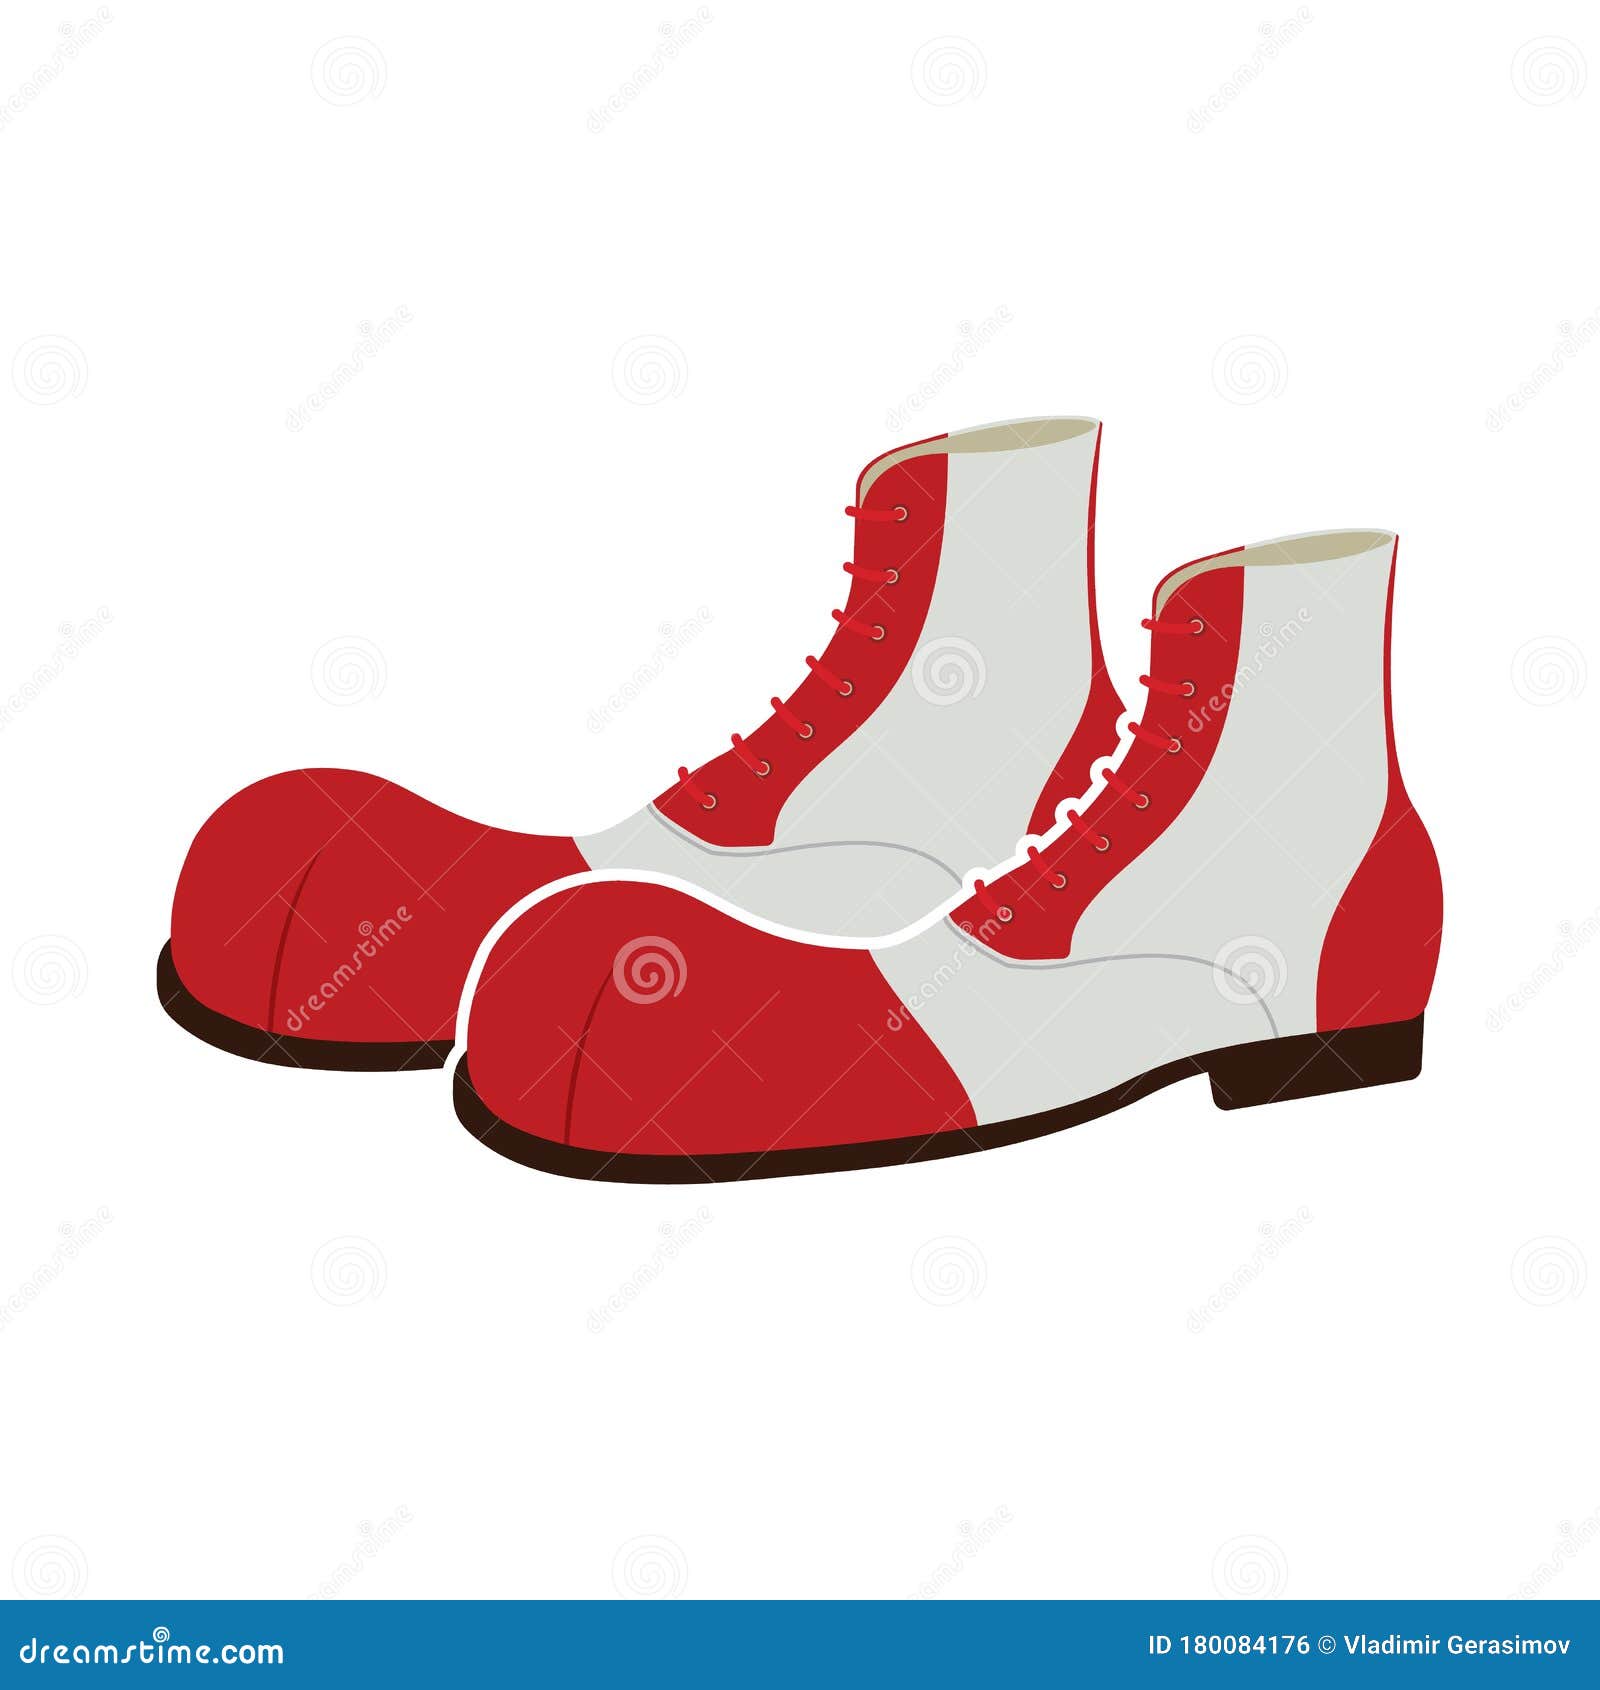 A Pair of Clown Shoes. Vector Illustration Stock Illustration ...